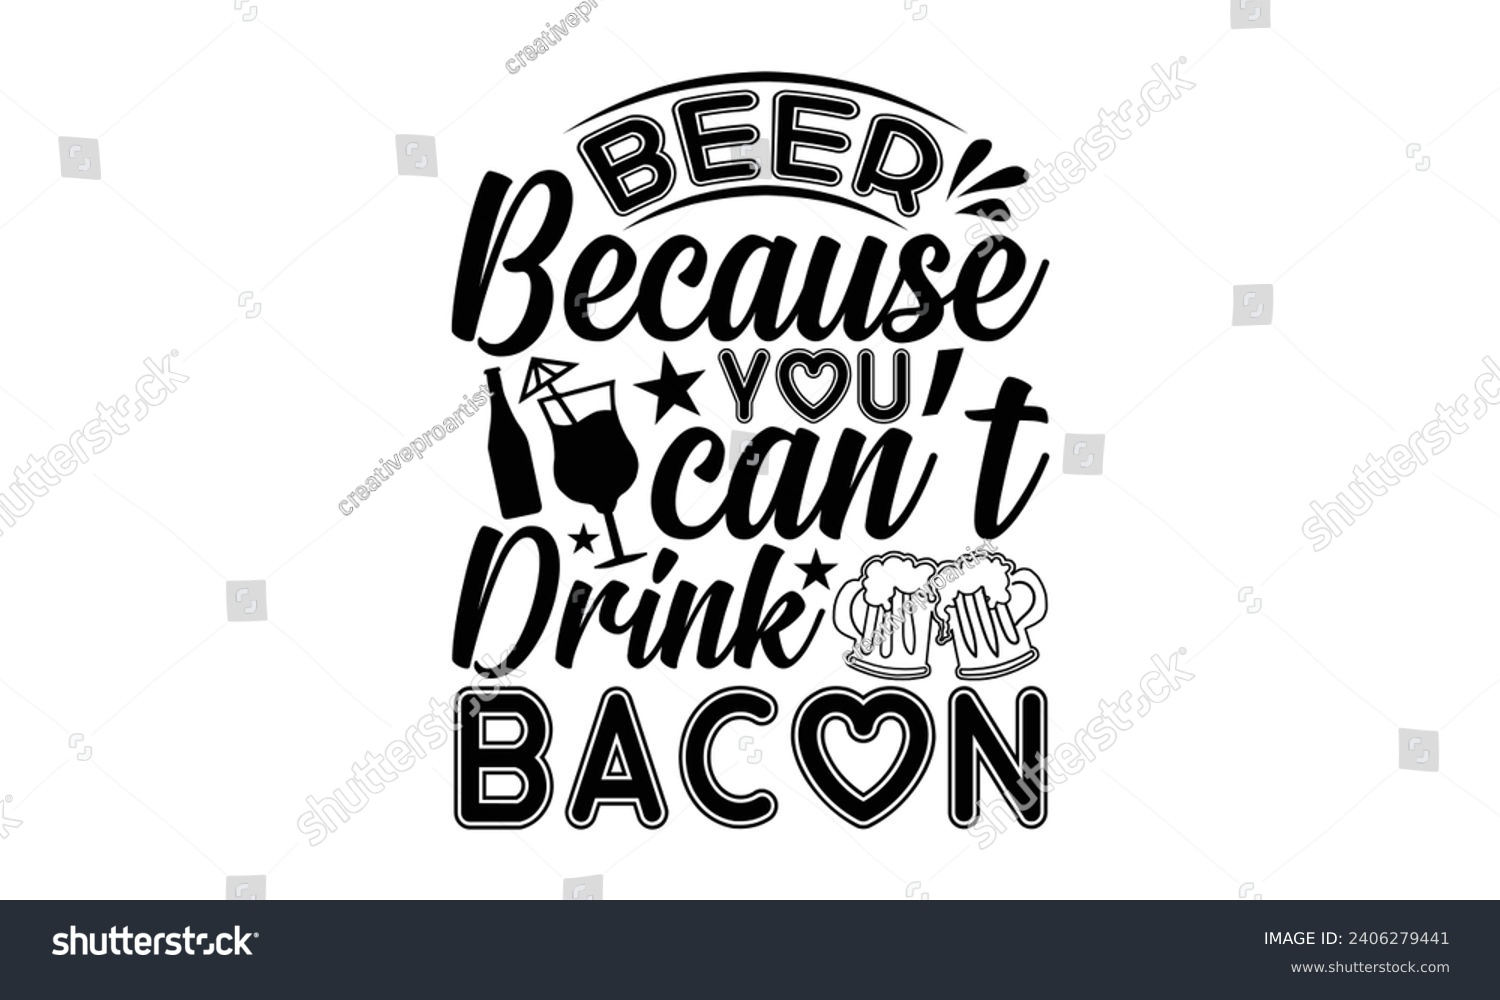 SVG of Beer Because You Can’t Drink Bacon- Beer t- shirt design, Handmade calligraphy vector illustration for Cutting Machine, Silhouette Cameo, Cricut, Vector illustration Template. svg